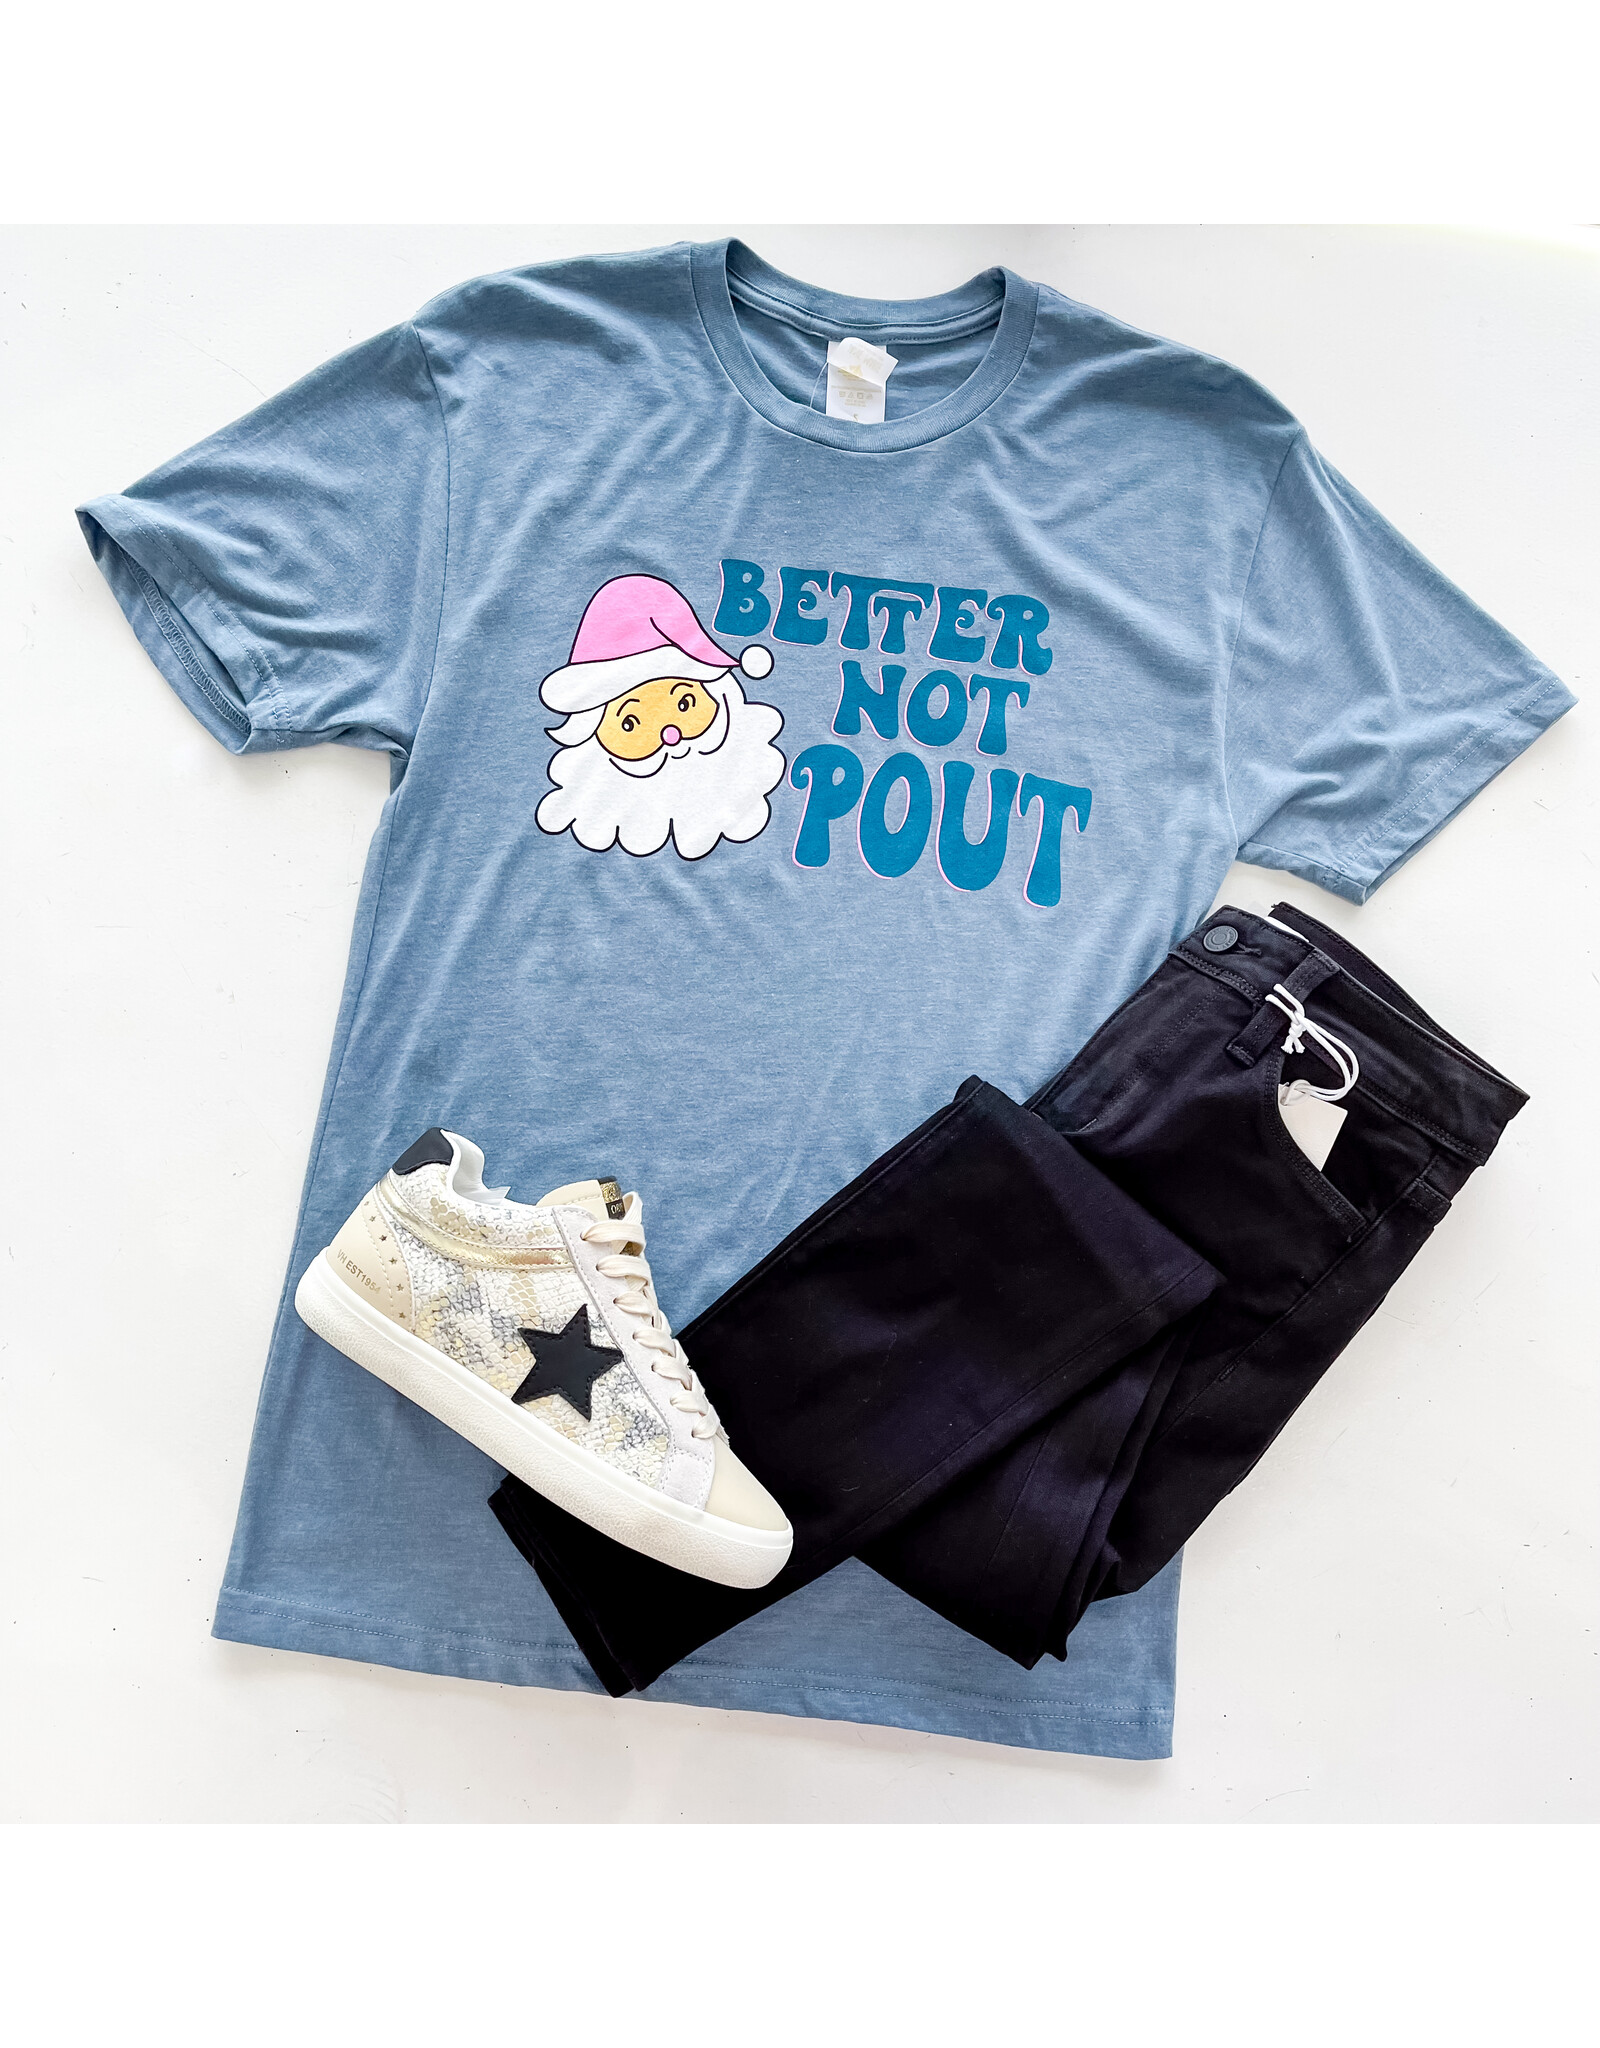 Better Not Pout Tee - The Magnolia